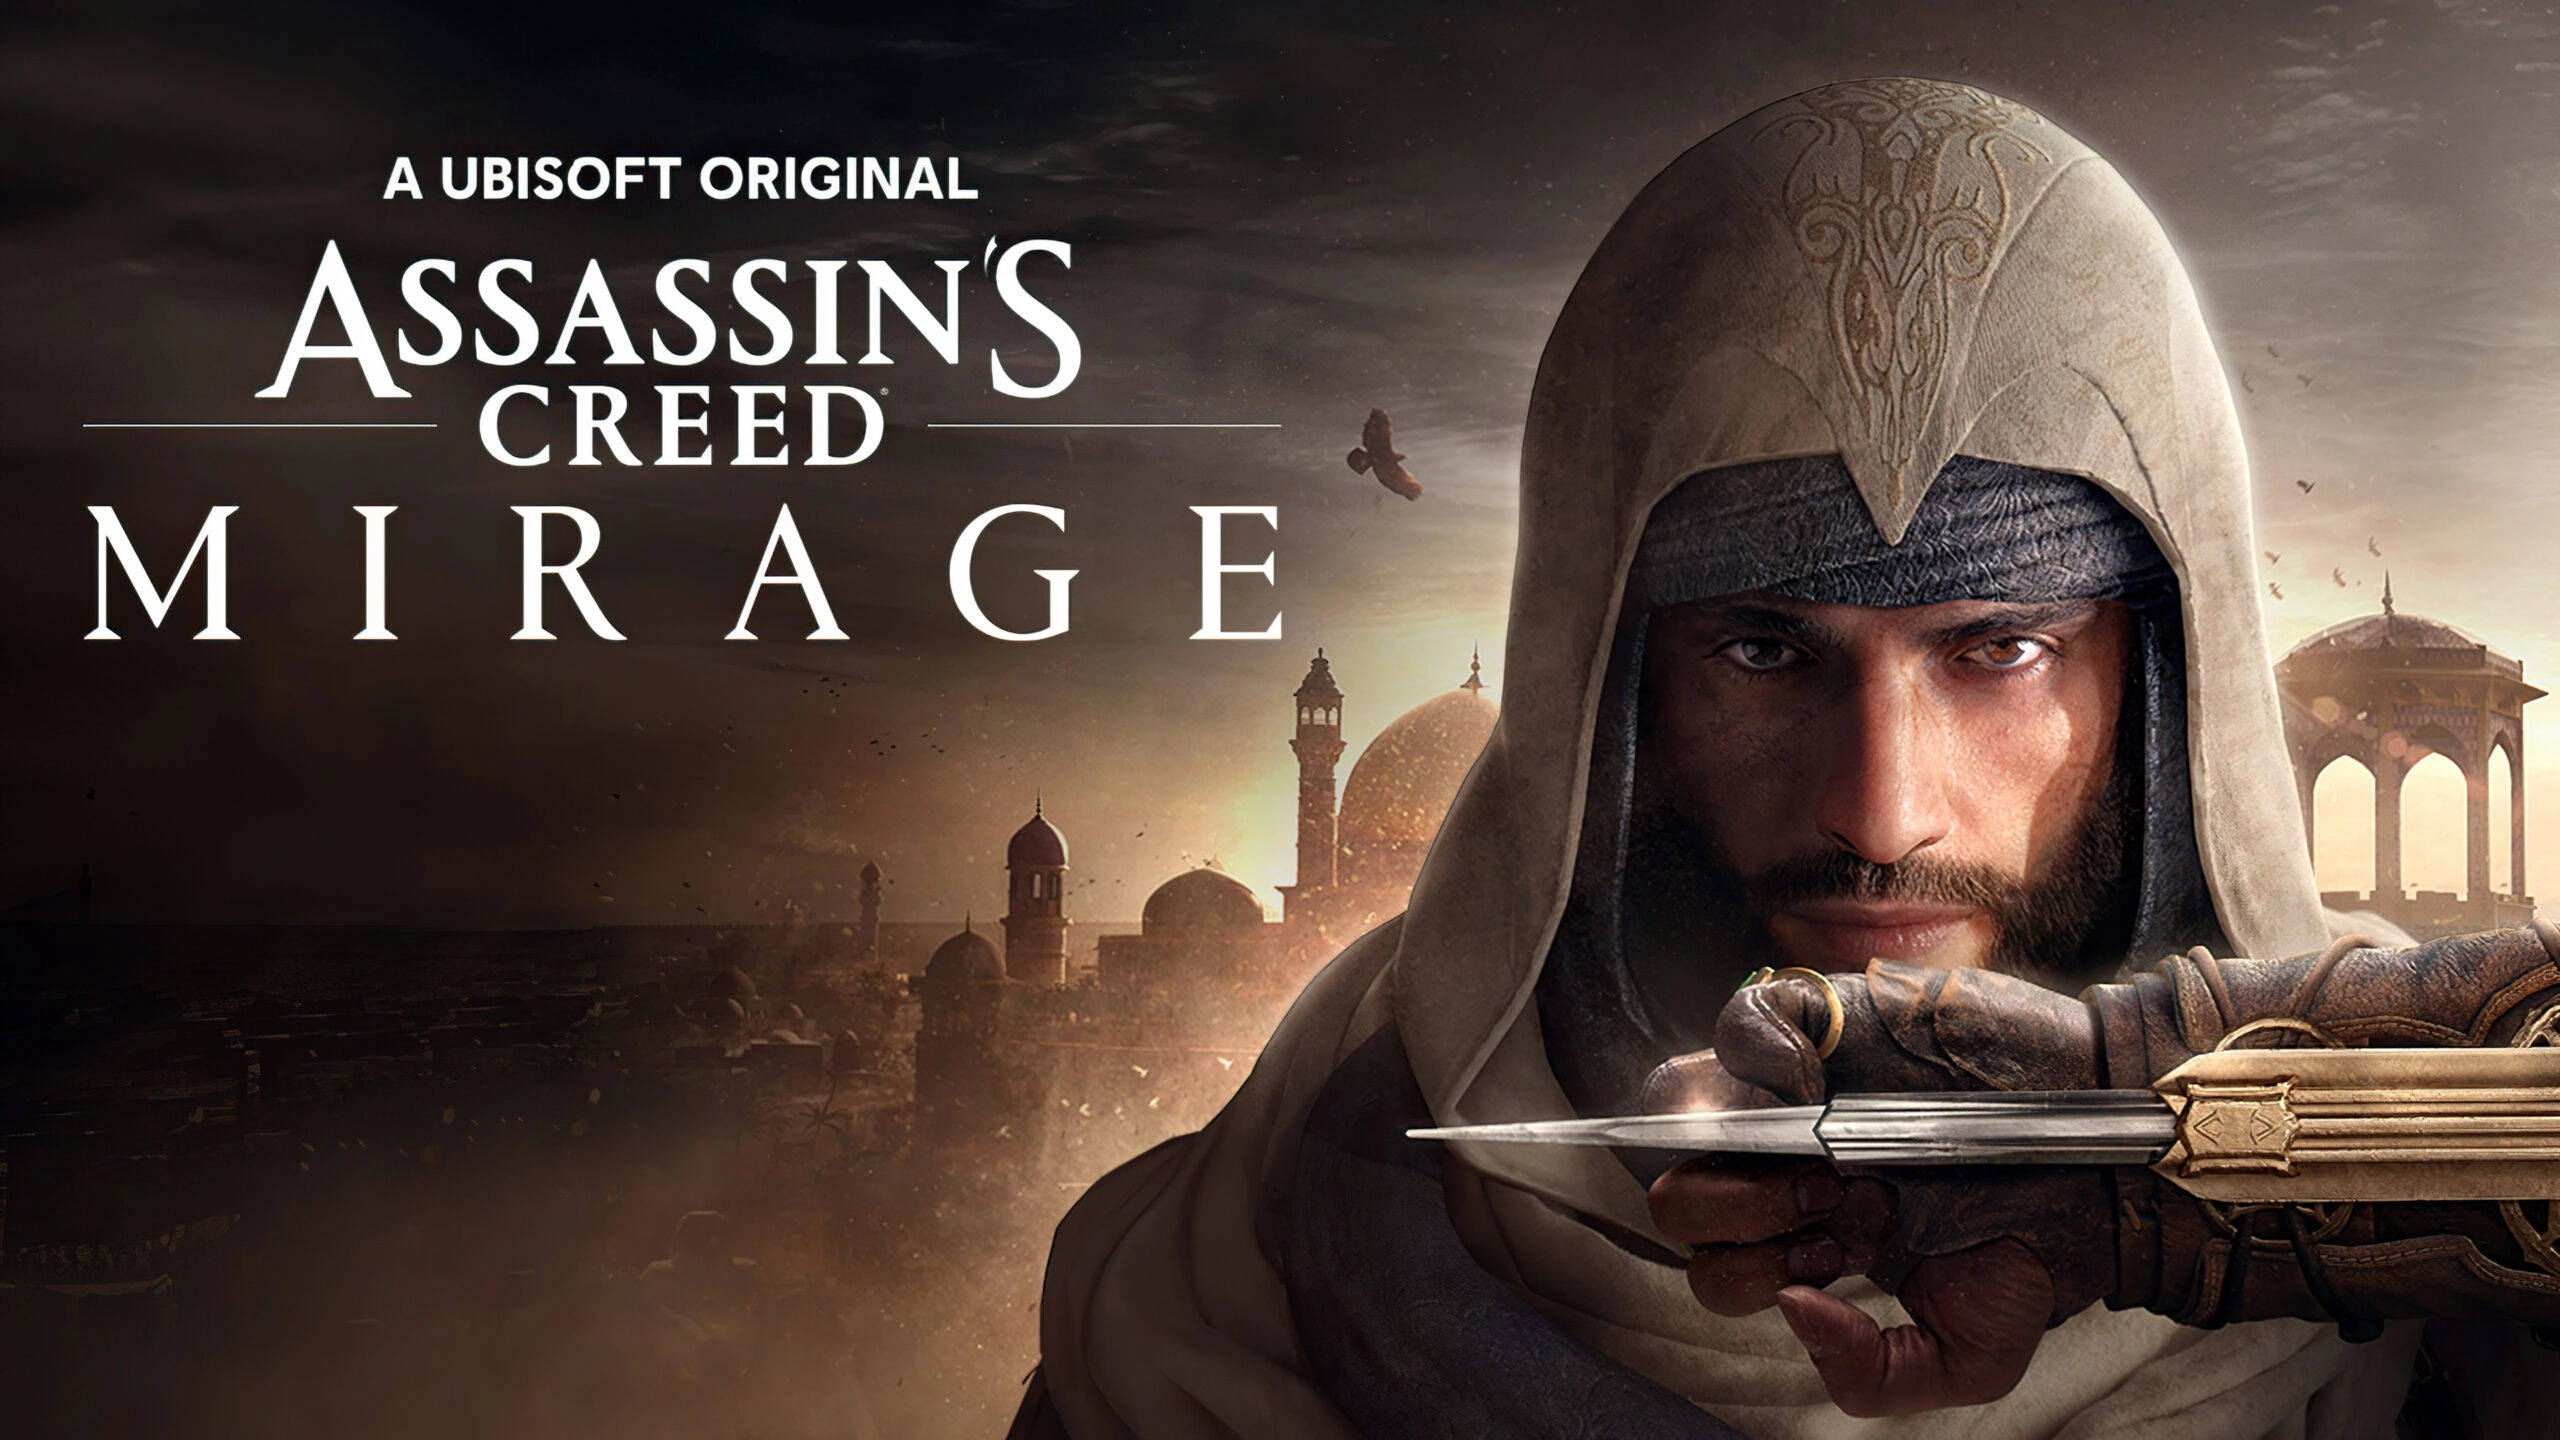 Assassin's Creed Mirage set to release on [insert date]